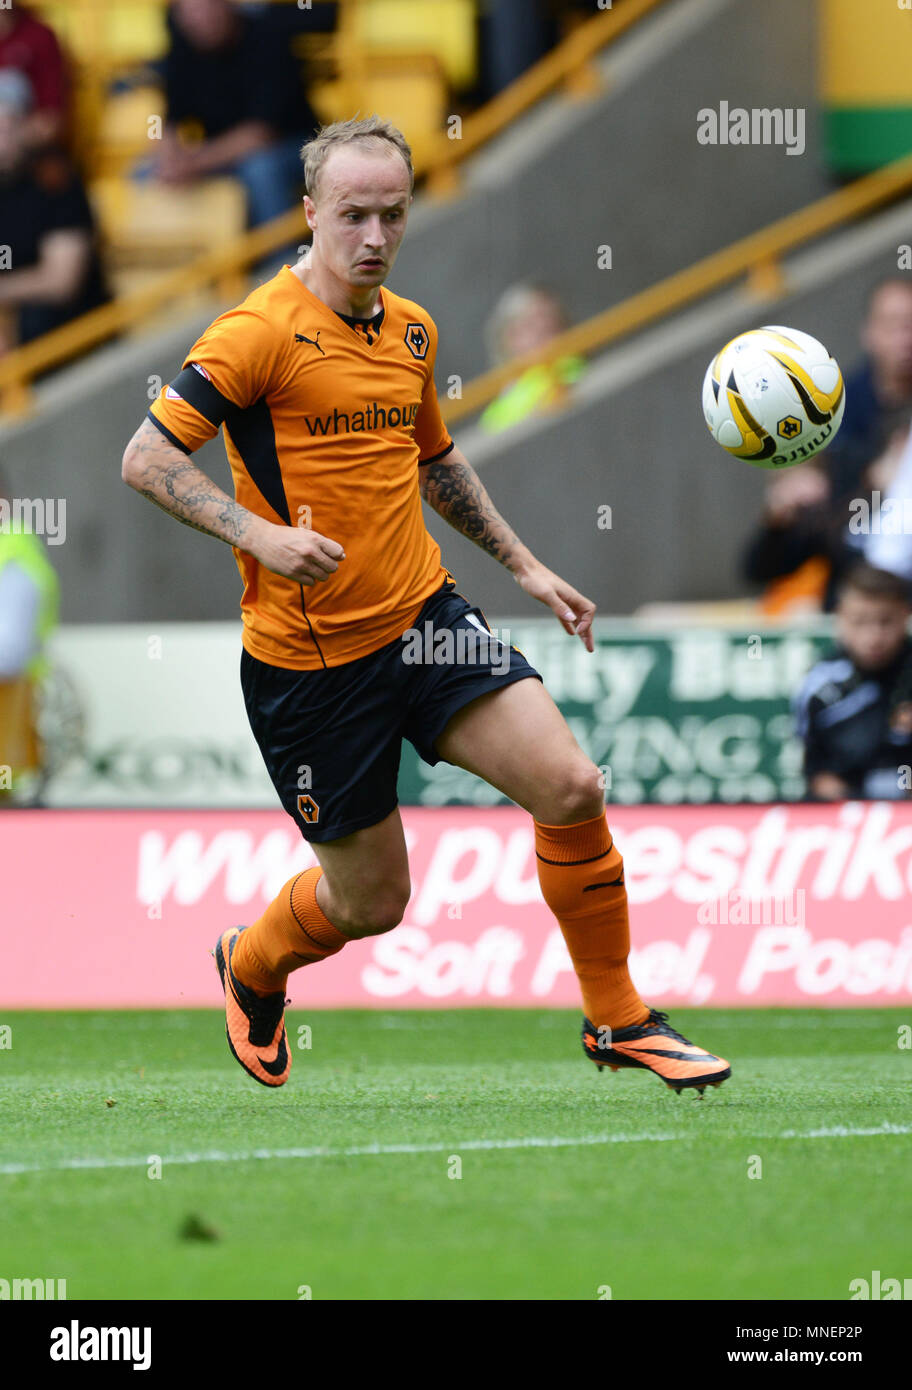 Wolverhampton Wanderers footballer Leigh Griffiths in action 2013 Stock Photo